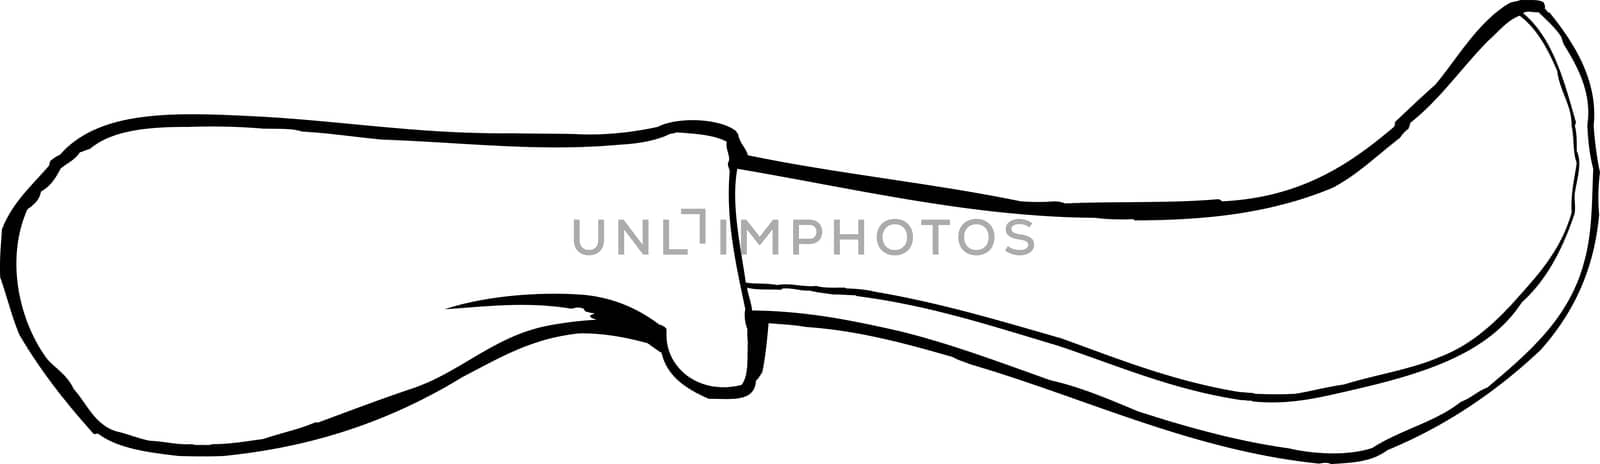 Outlined skinning knife over isolated background